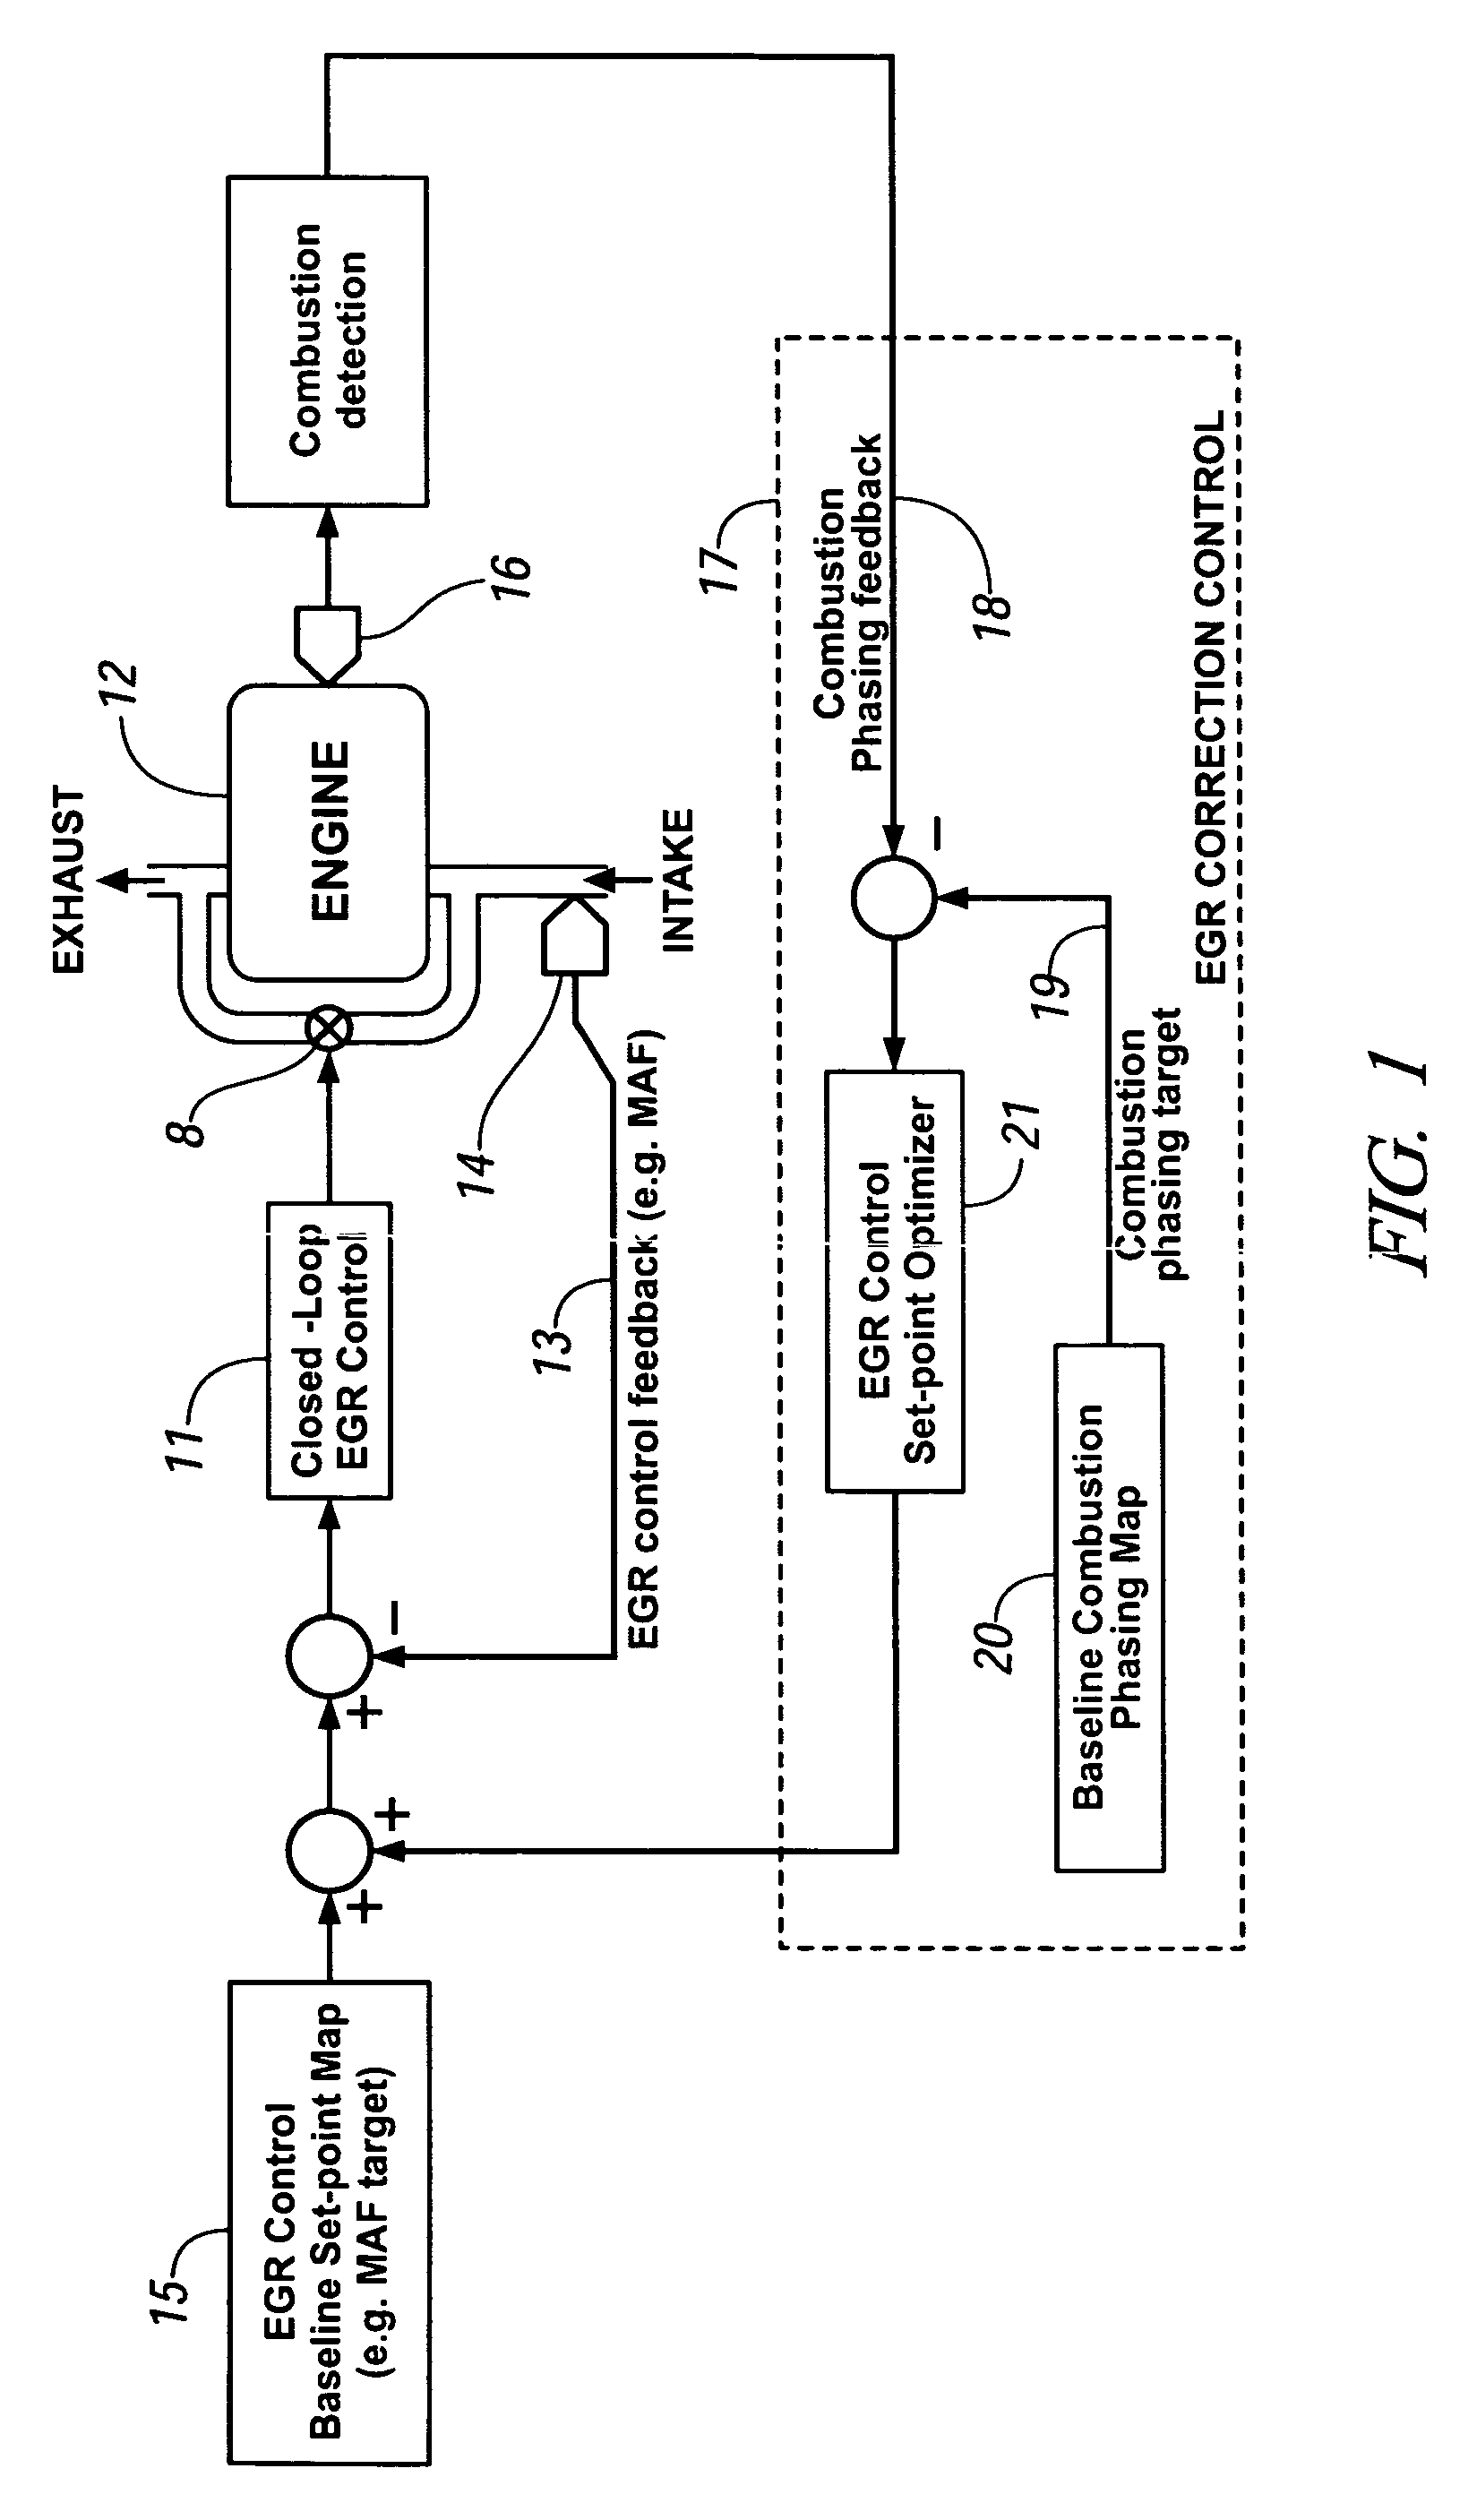 Simultaneous EGR correction and individual cylinder combustion phase balancing